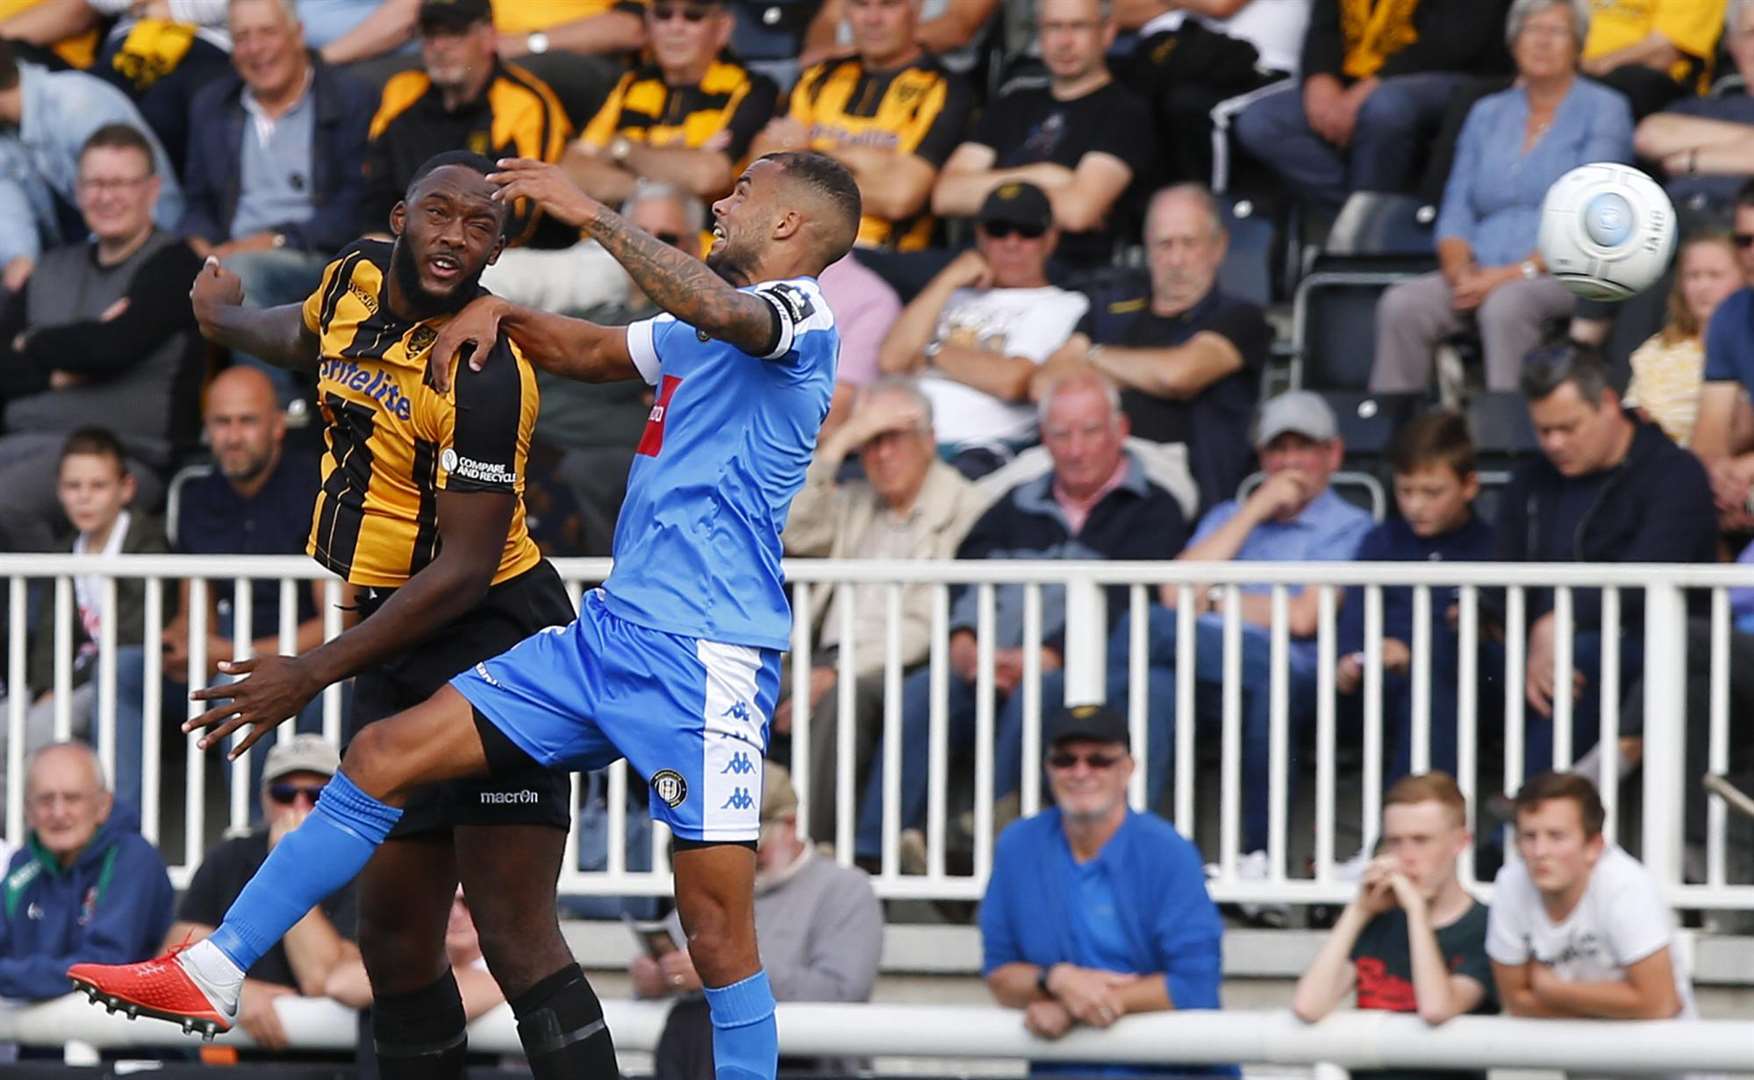 Maidstone forward Shamir Mullings does aerial battle Picture: Andy Jones